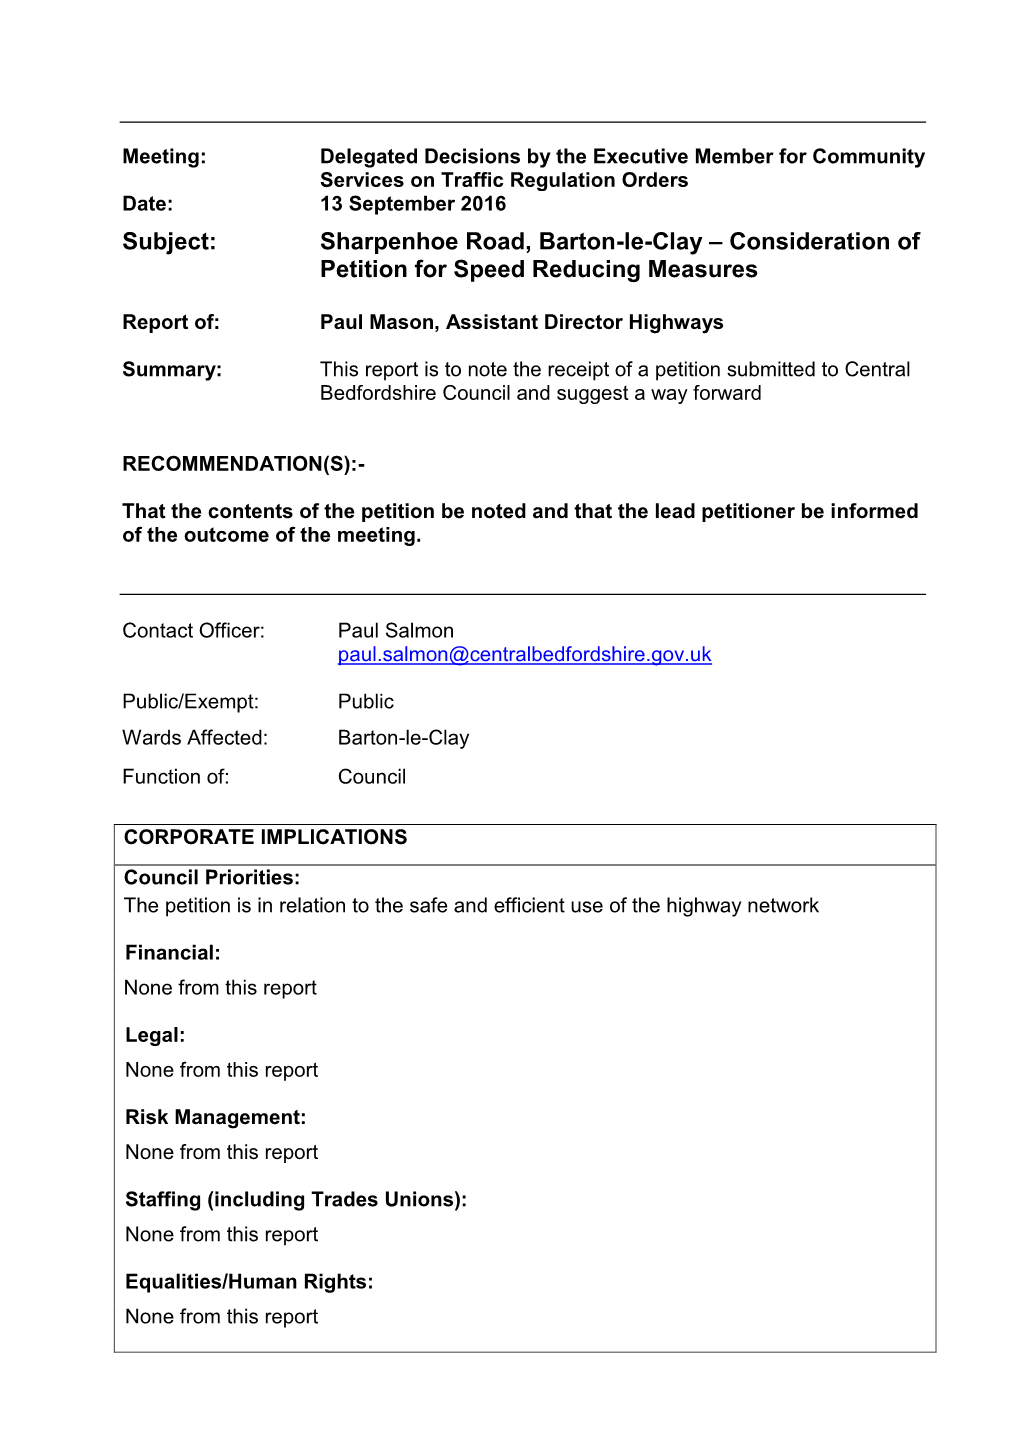 Subject: Sharpenhoe Road, Barton-Le-Clay – Consideration of Petition for Speed Reducing Measures